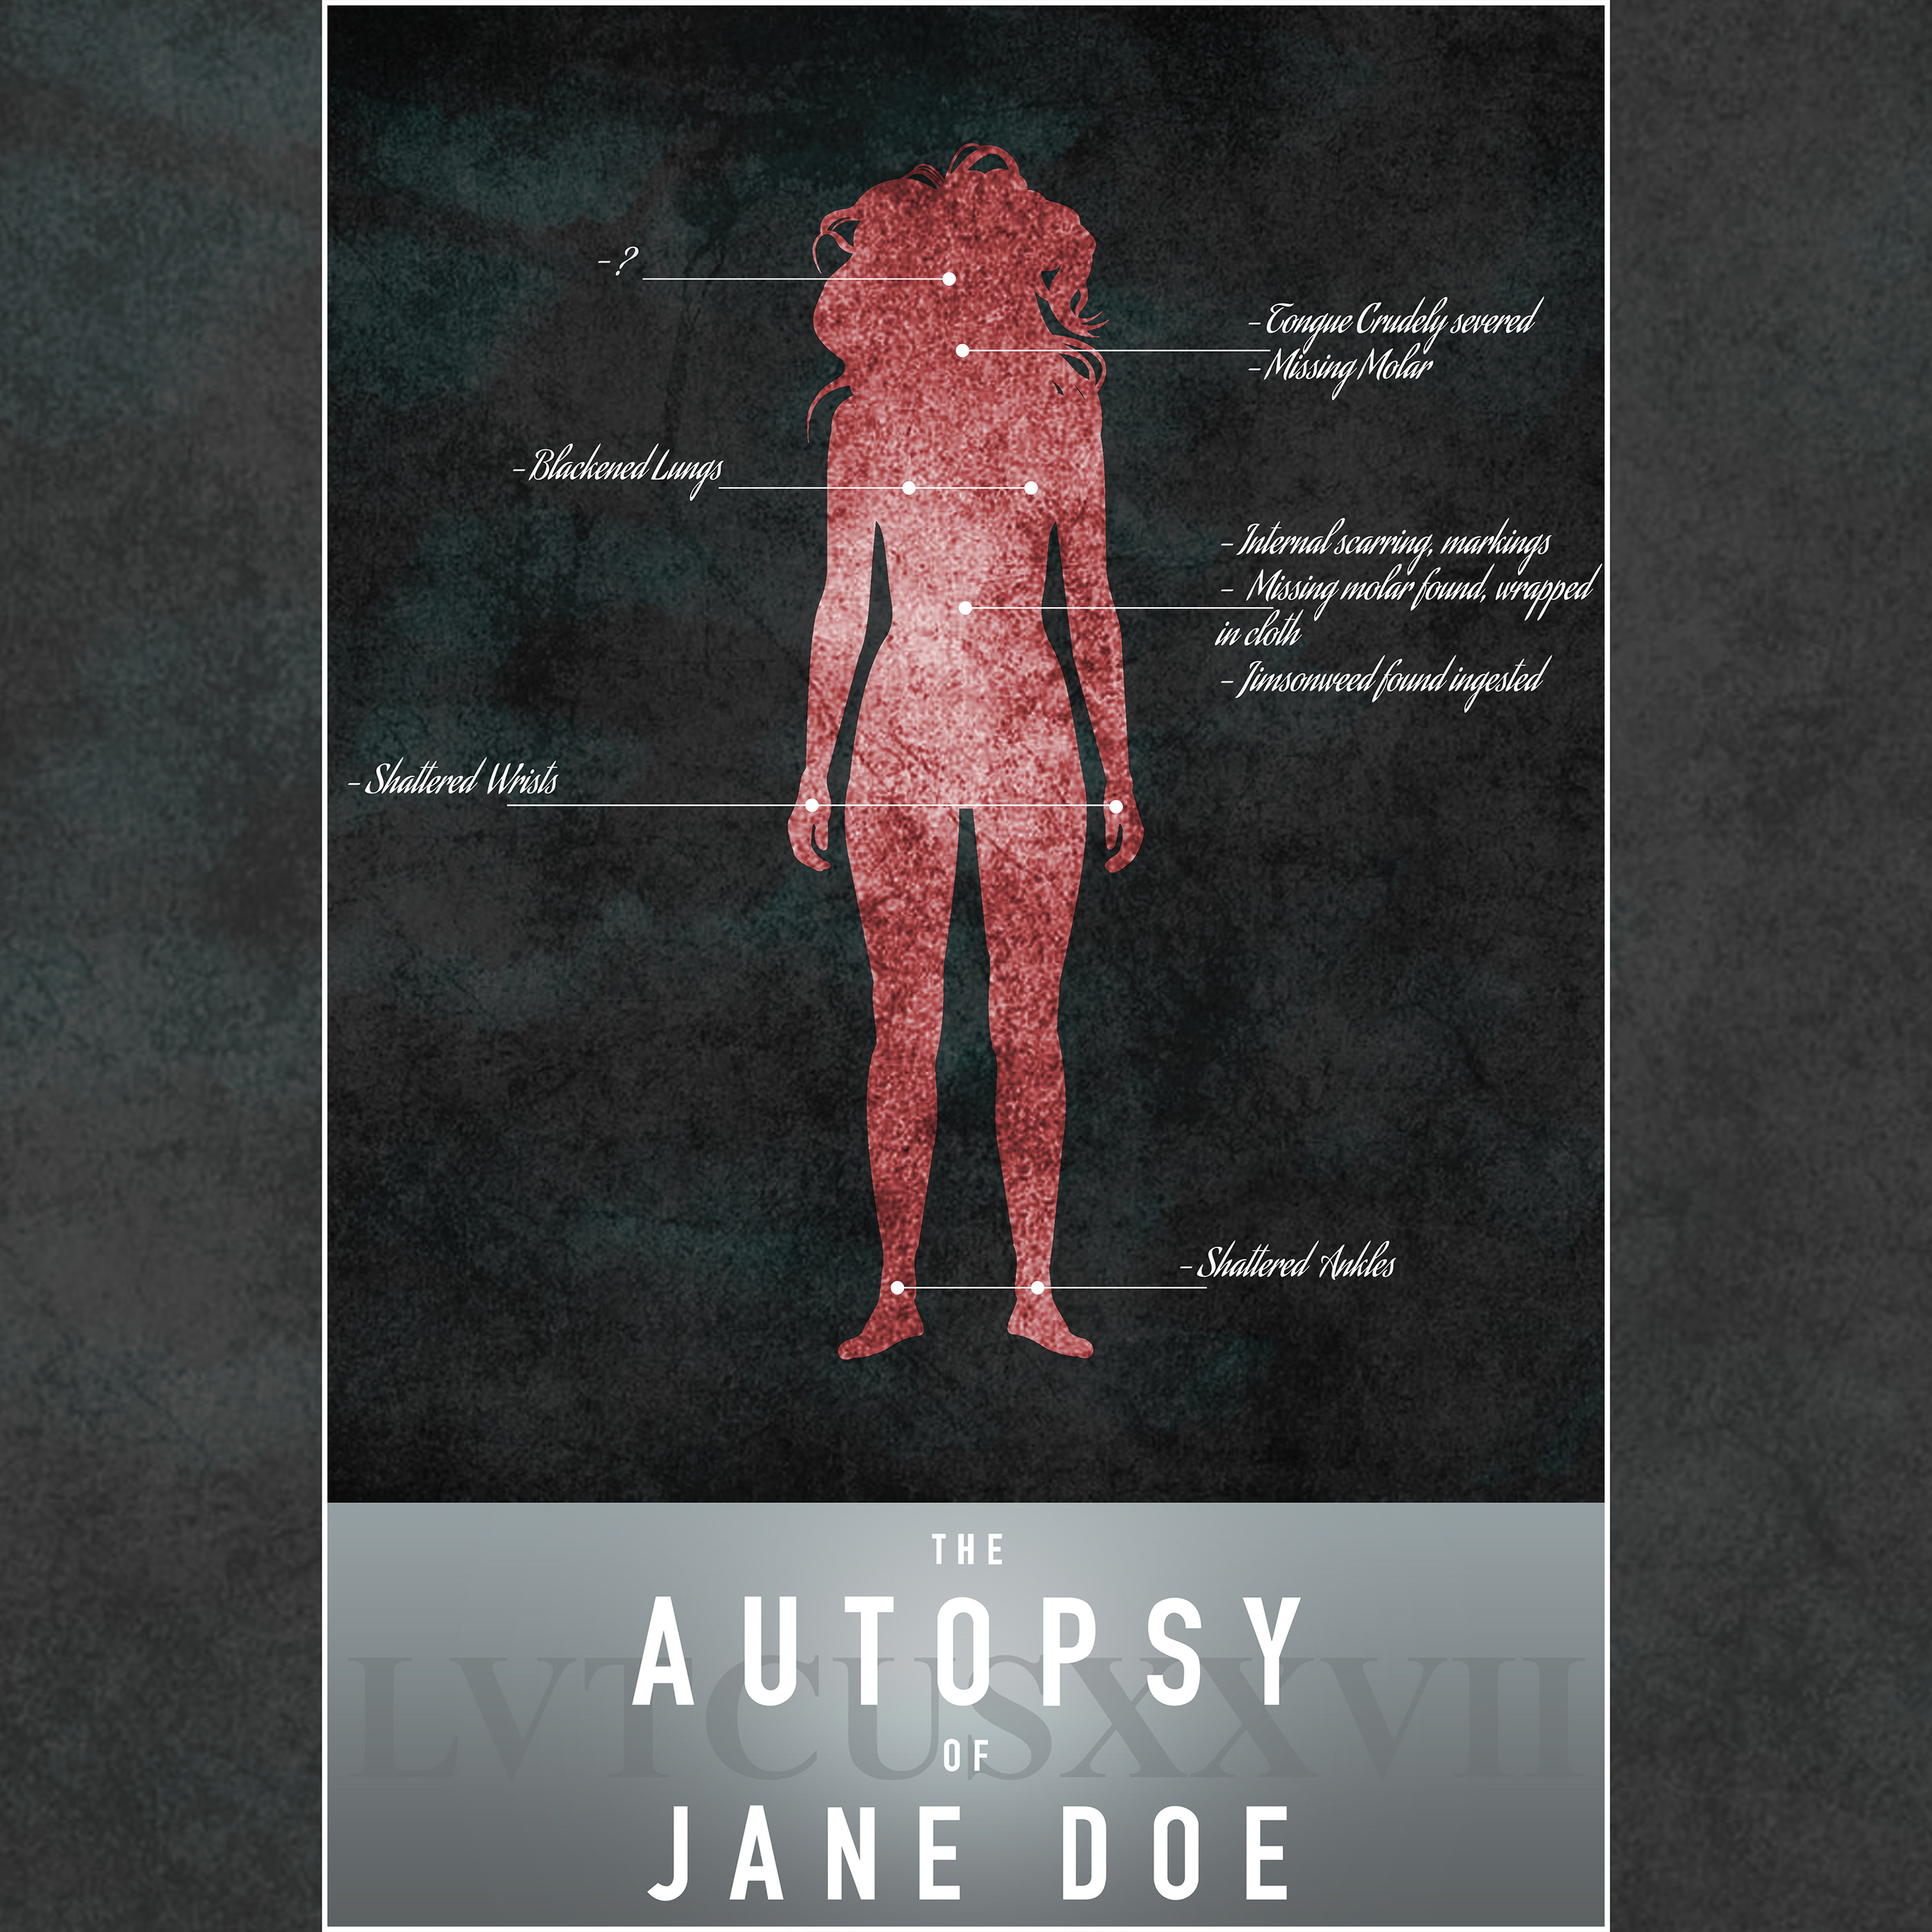 Jane of The Autopsy